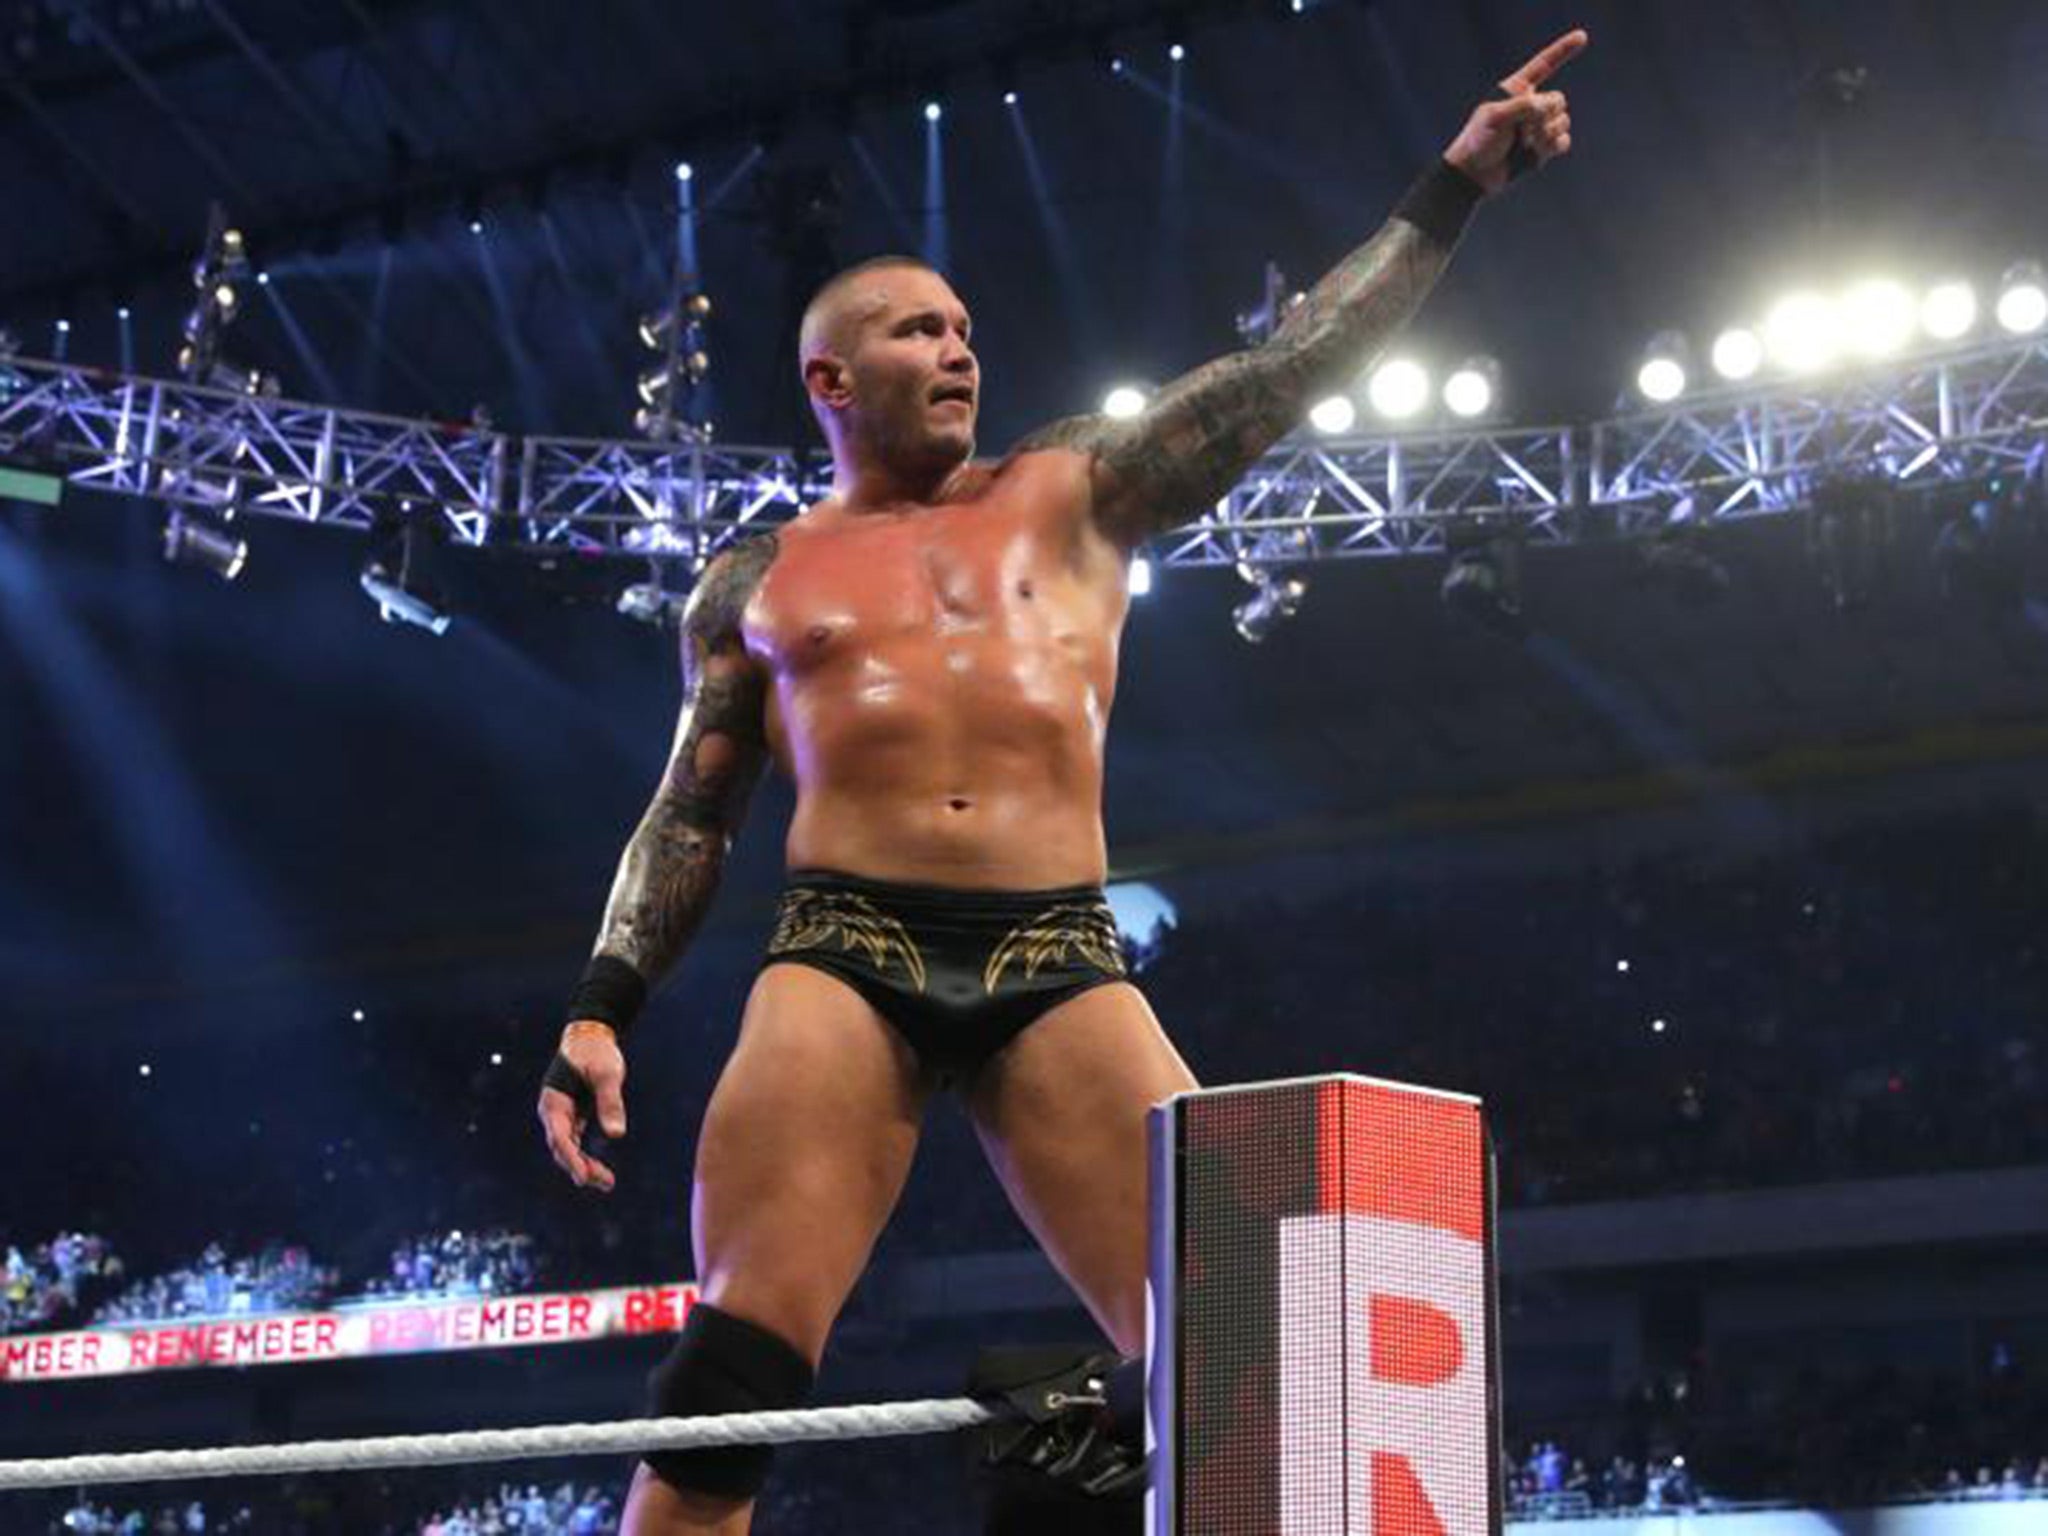 Randy Orton celebrates his victory in this year's Royal Rumble